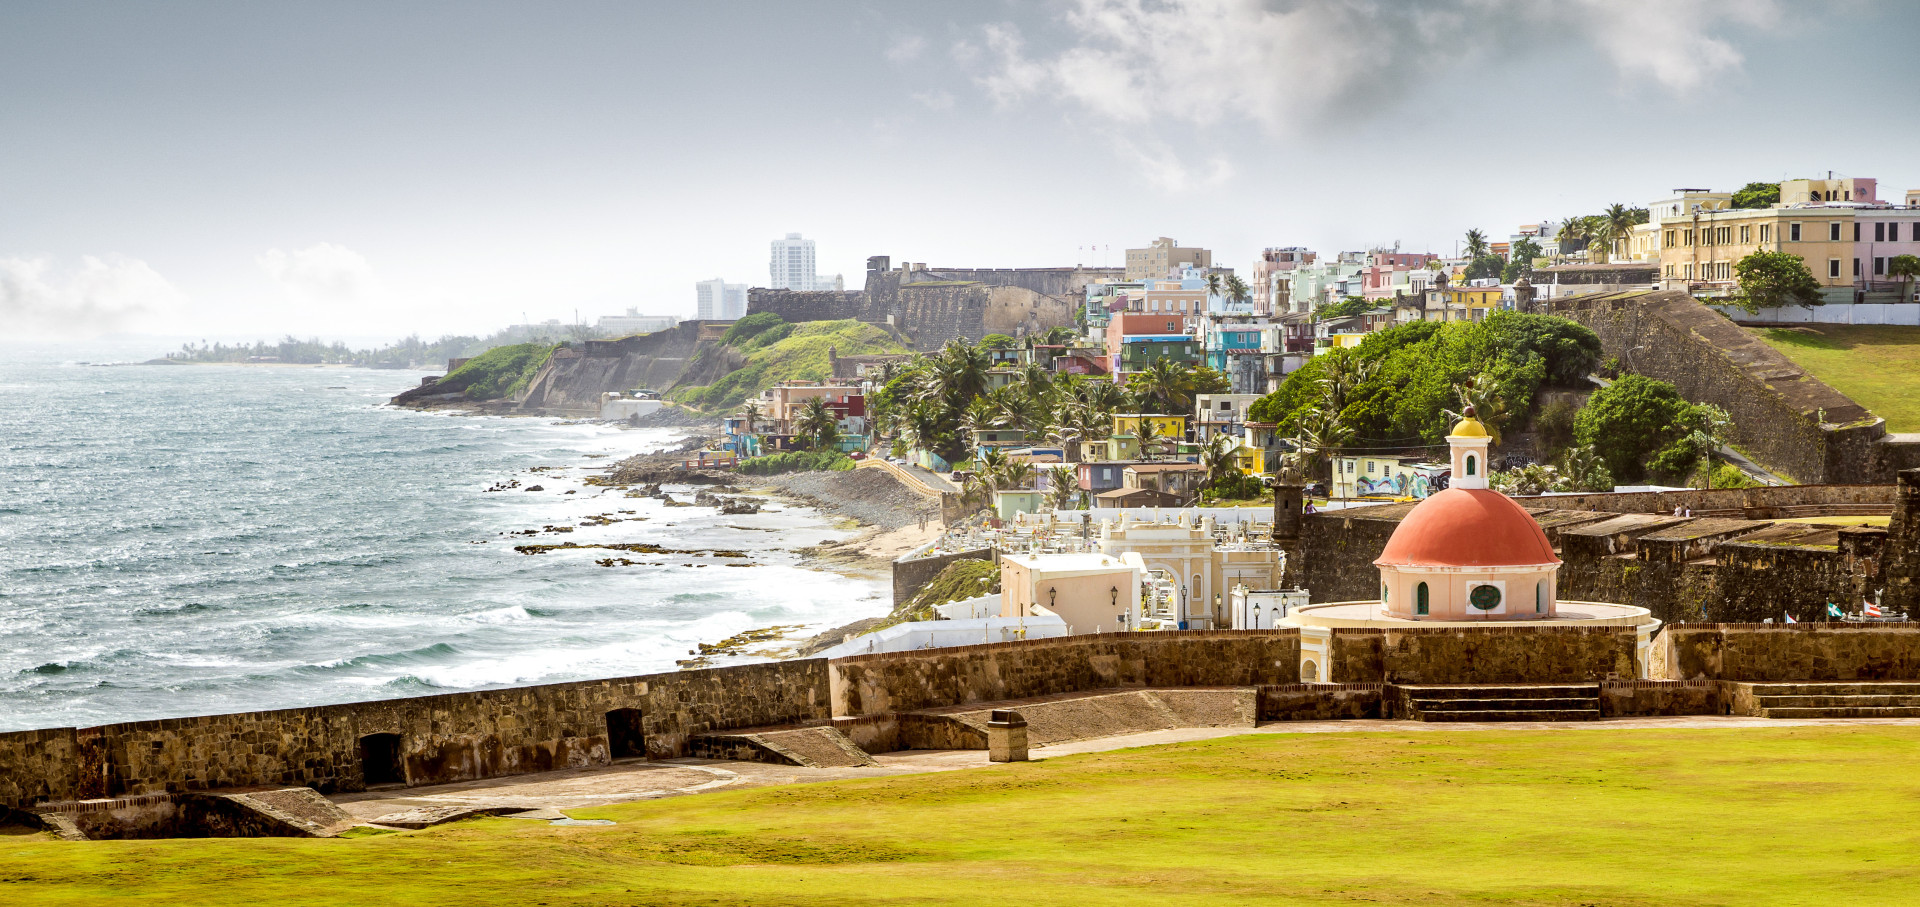 For a more down-to-earth experience, take a stroll through this historical San Juan neighborhood. It's not necessarily a tourist location, but this shanty town offers unbeatable views of the Atlantic and a more realistic take on San Juan’s everyday life.<p>You may also like:<a href="https://www.starsinsider.com/n/350820?utm_source=msn.com&utm_medium=display&utm_campaign=referral_description&utm_content=173131en-us"> Ugly celebrity divorces that will make you cringe</a></p>